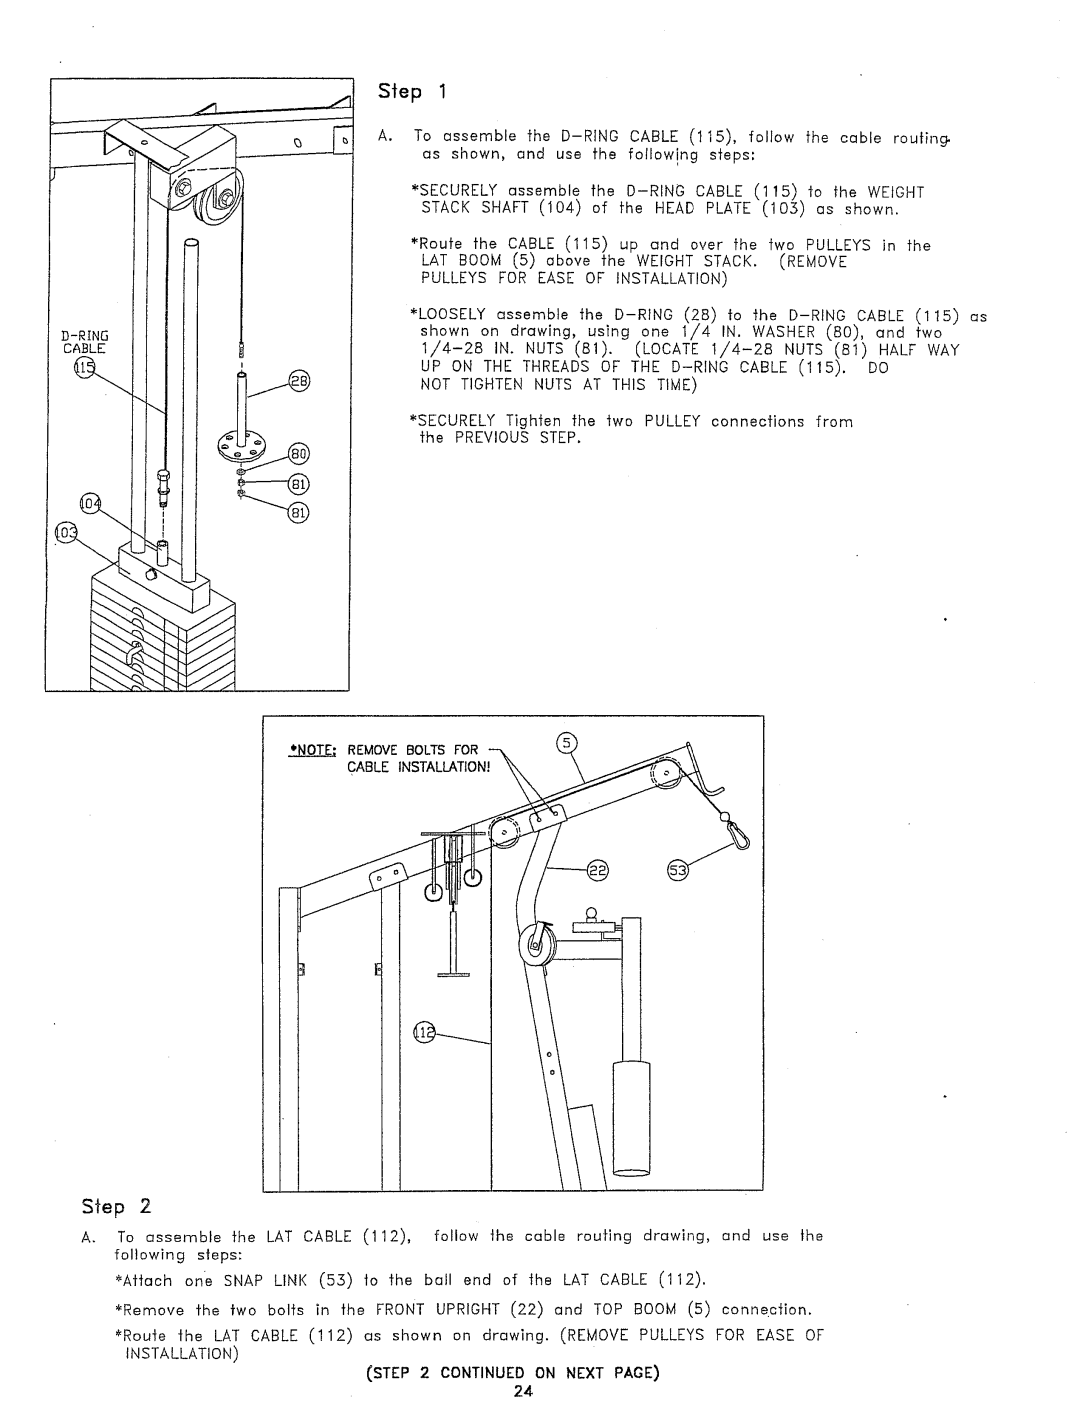 ParaBody 425 manual S~ep, Step, Note Removeboltsfor Cableinstallation, Continuedon Next Page 